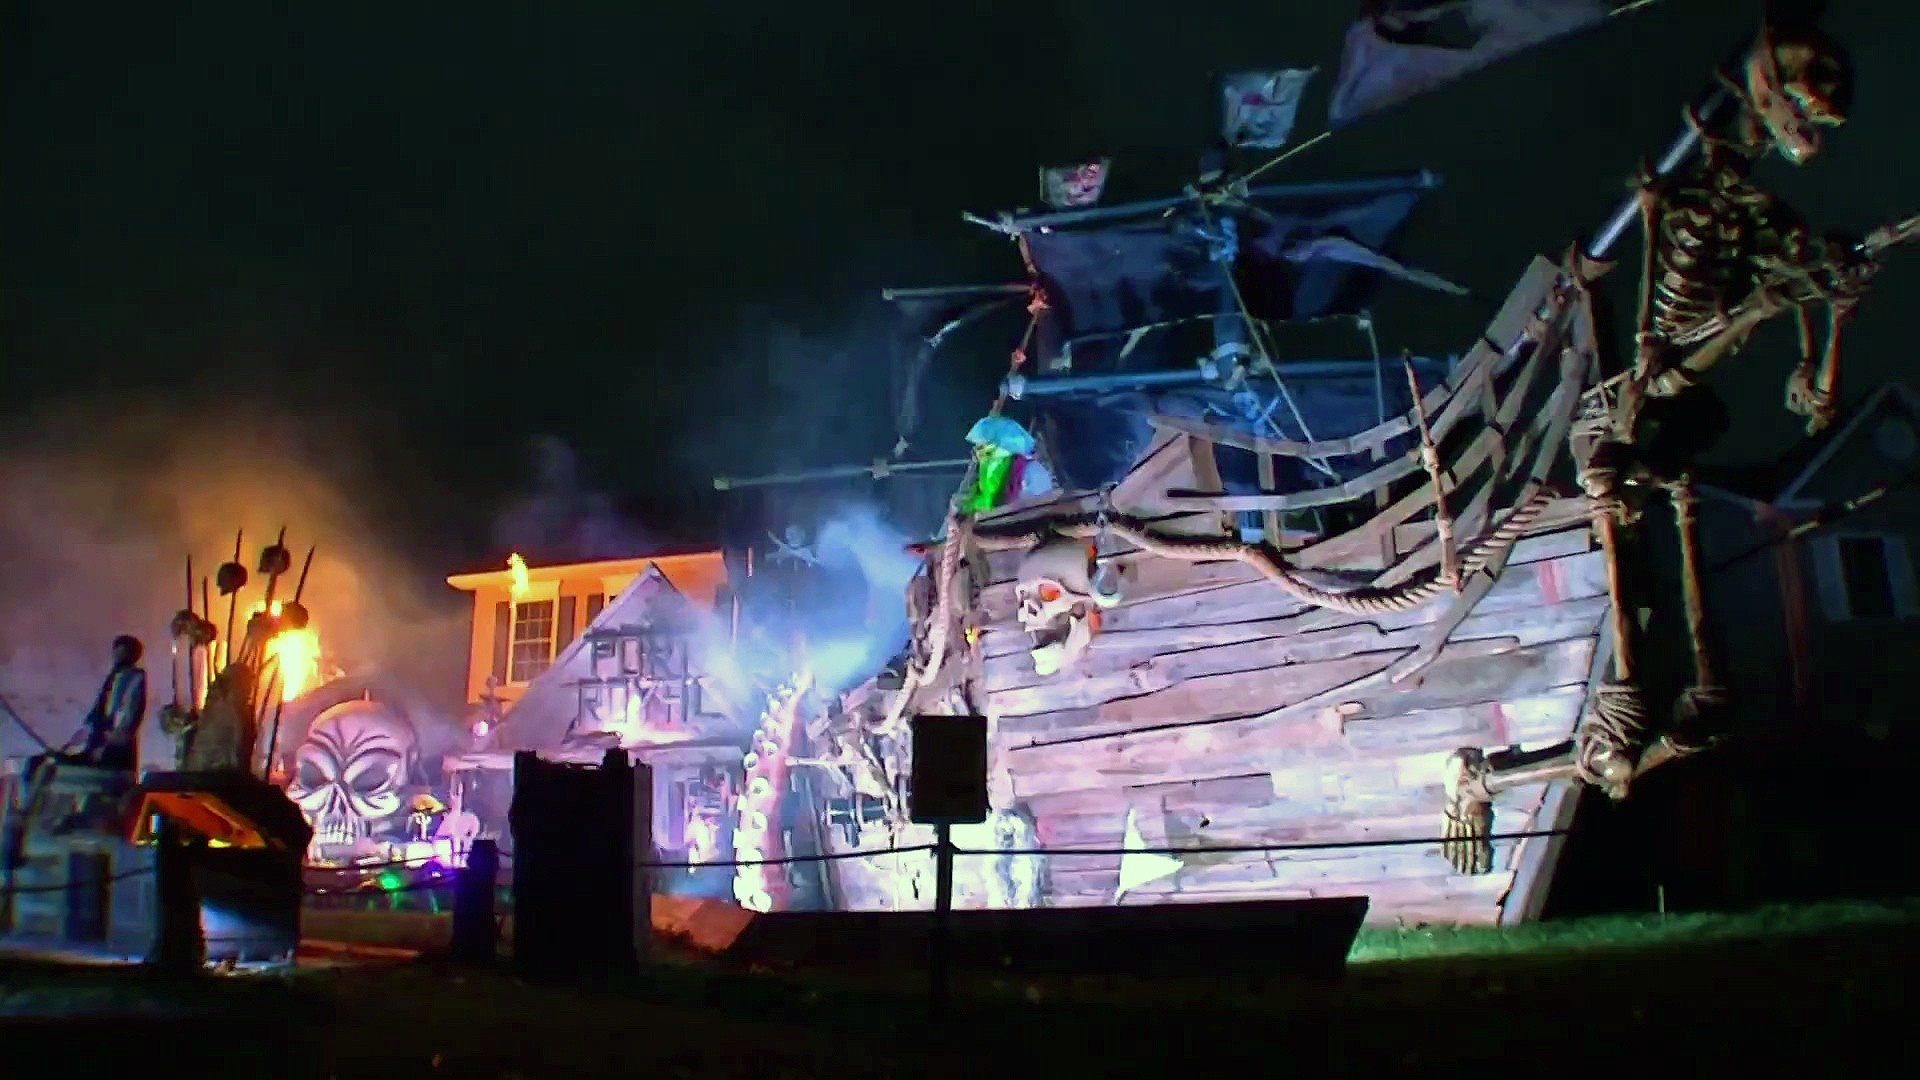 New York man builds pirate ship in front yard for Halloween